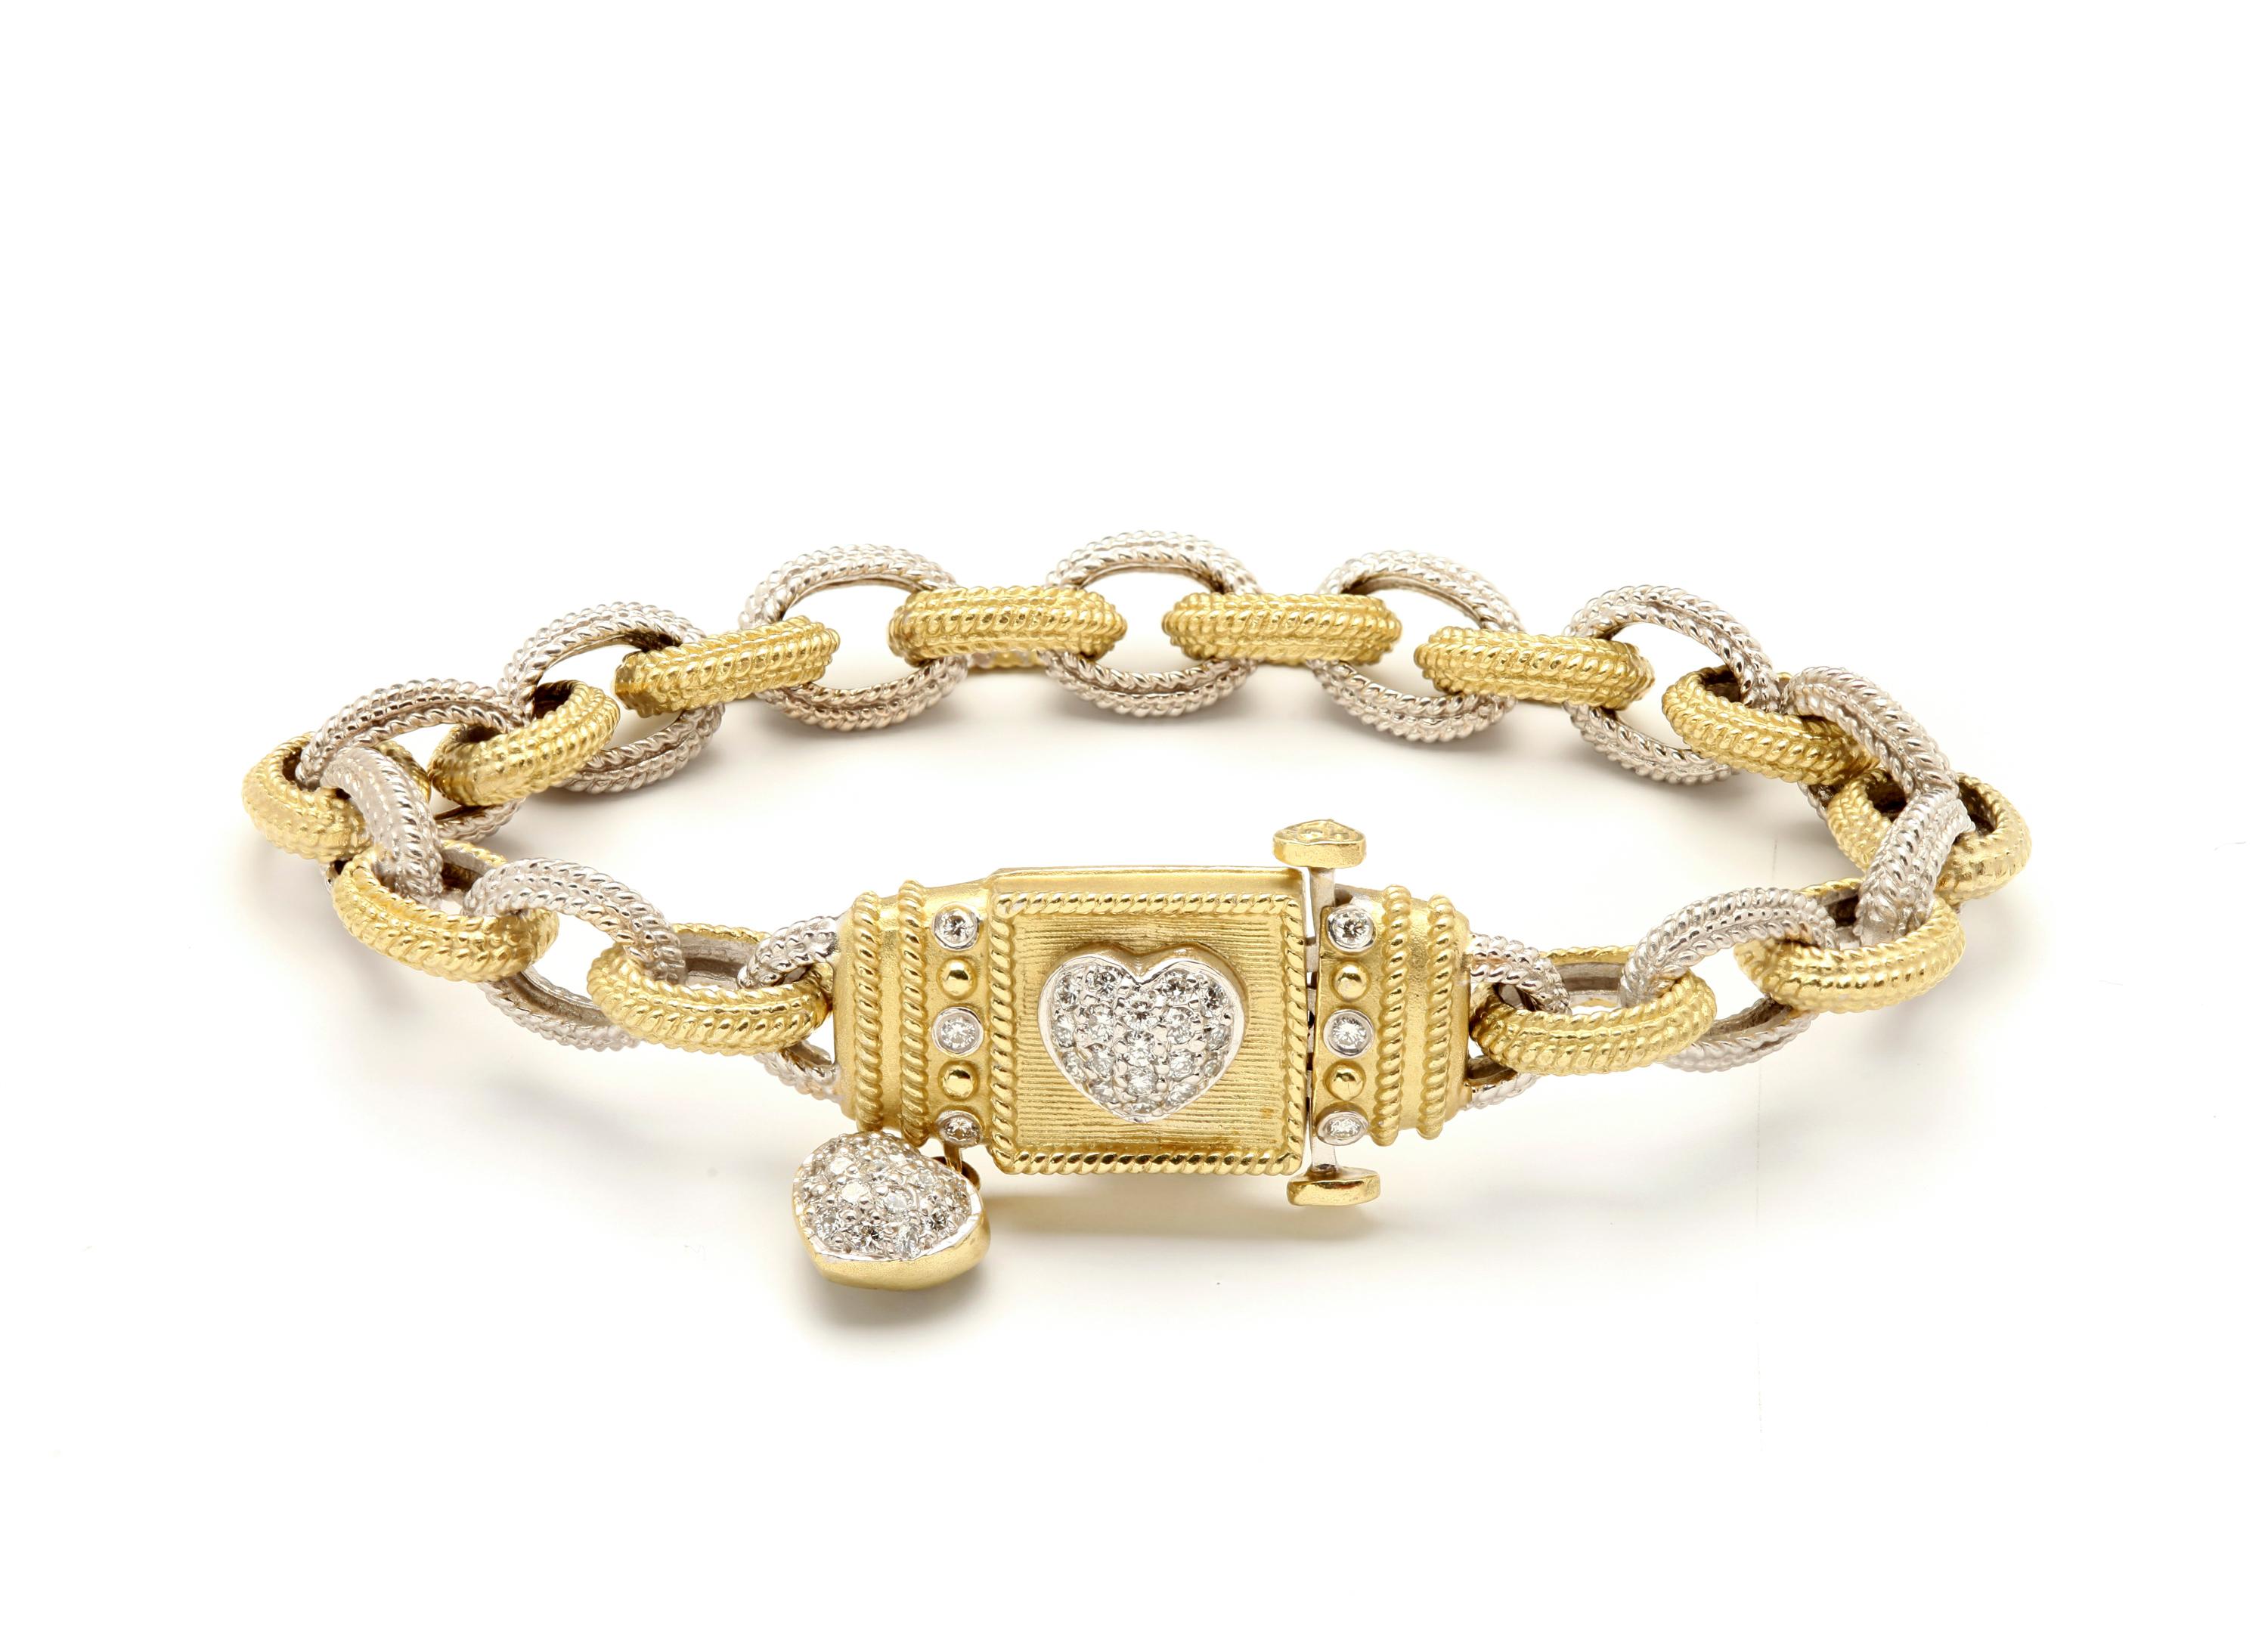 Women's Two-Tone Yellow White Gold and Diamond Link Bracelet with Hearts Stambolian